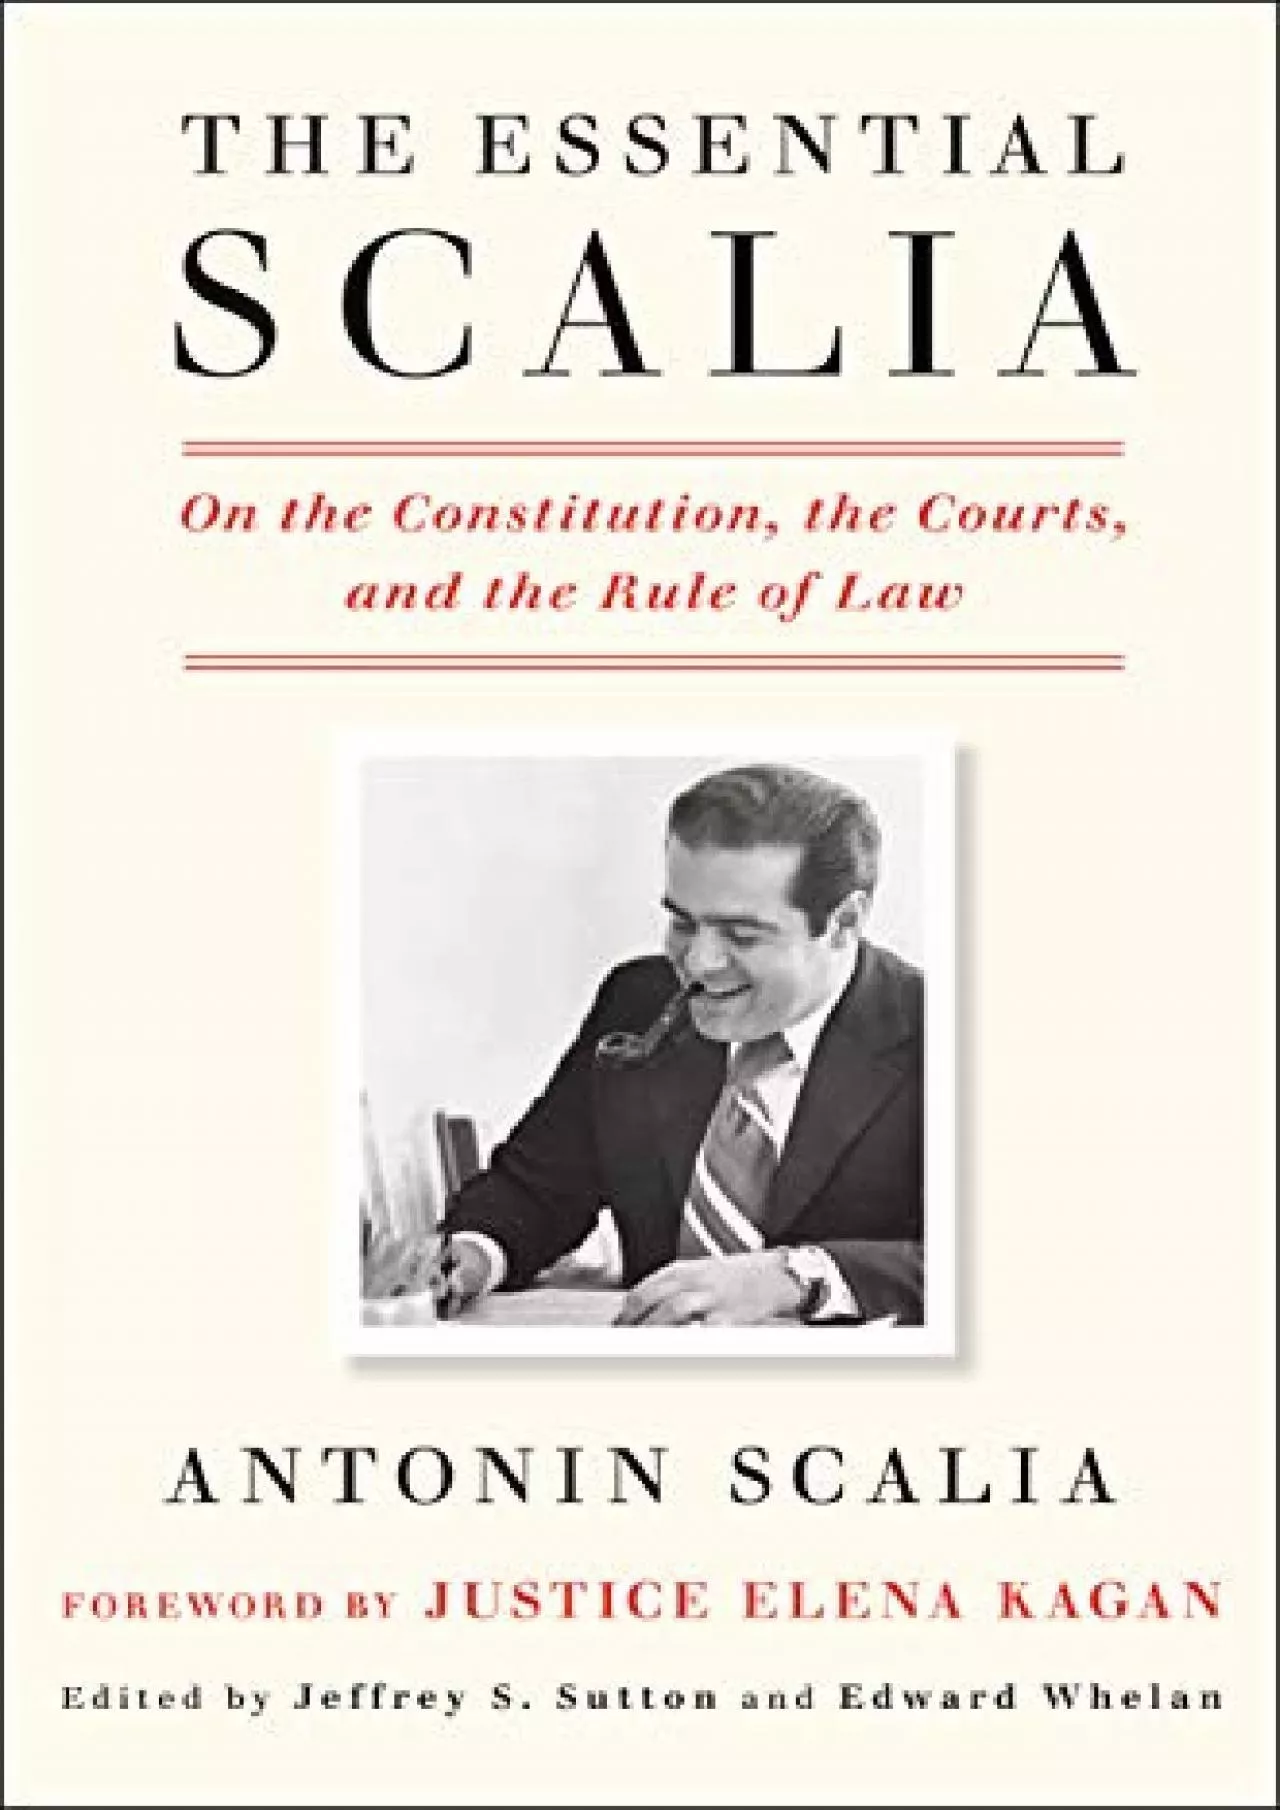 $PDF$/READ/DOWNLOAD The Essential Scalia: On the Constitution, the Courts, and the Rule